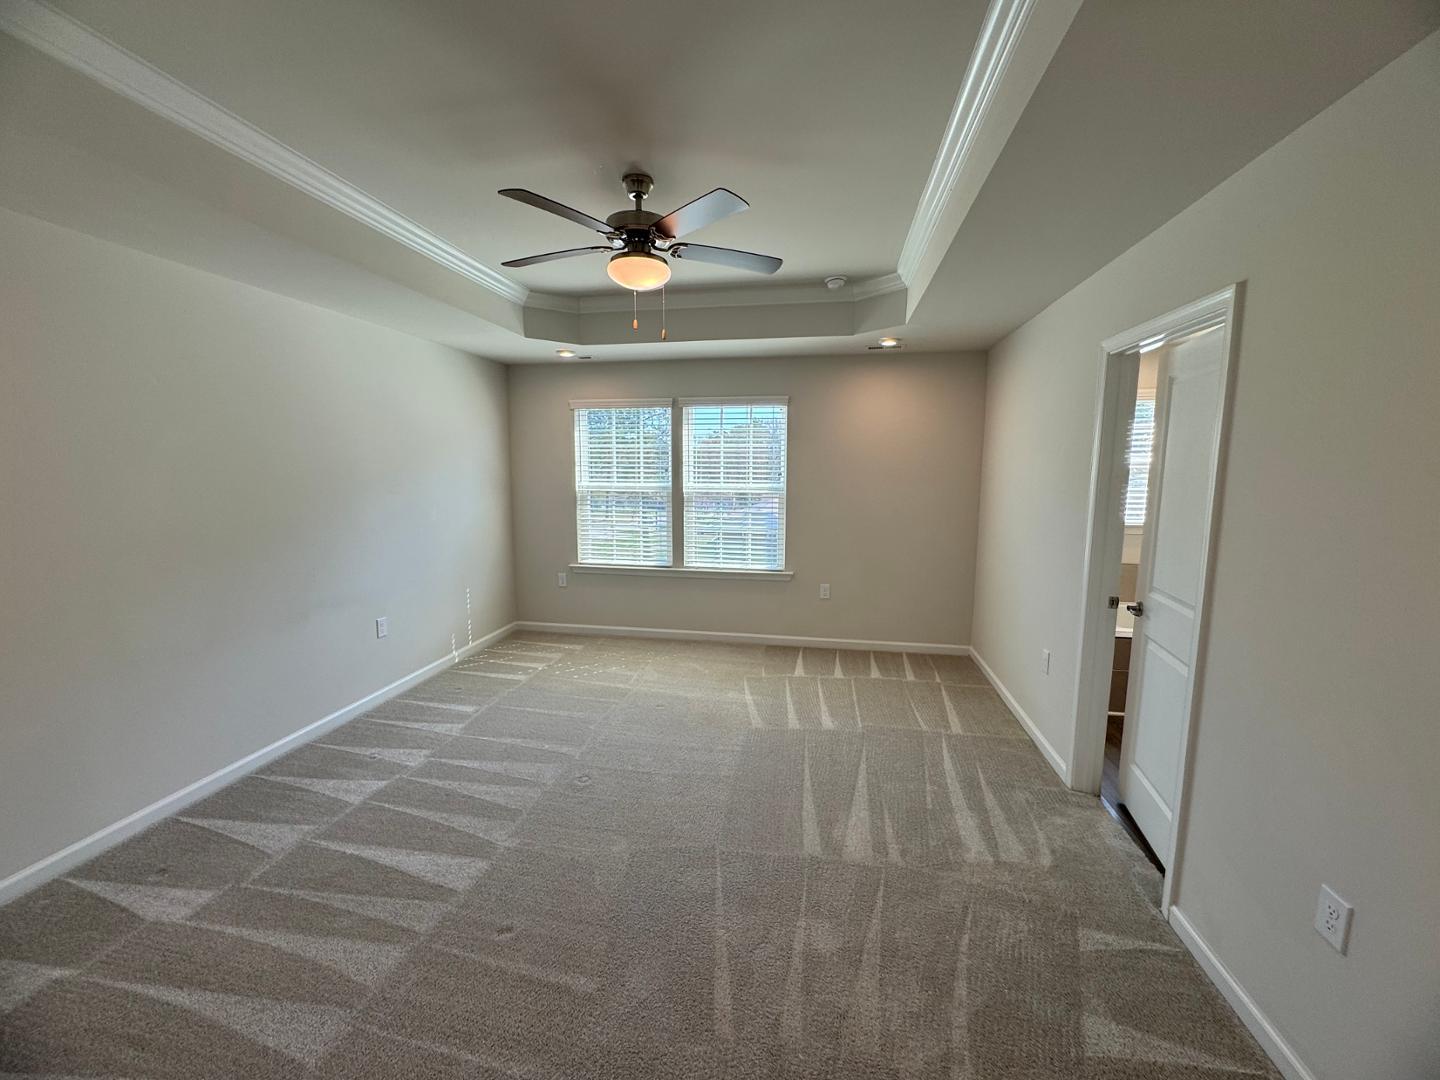 Photo 9 of 21 of 6422 Pathfinder Way townhome